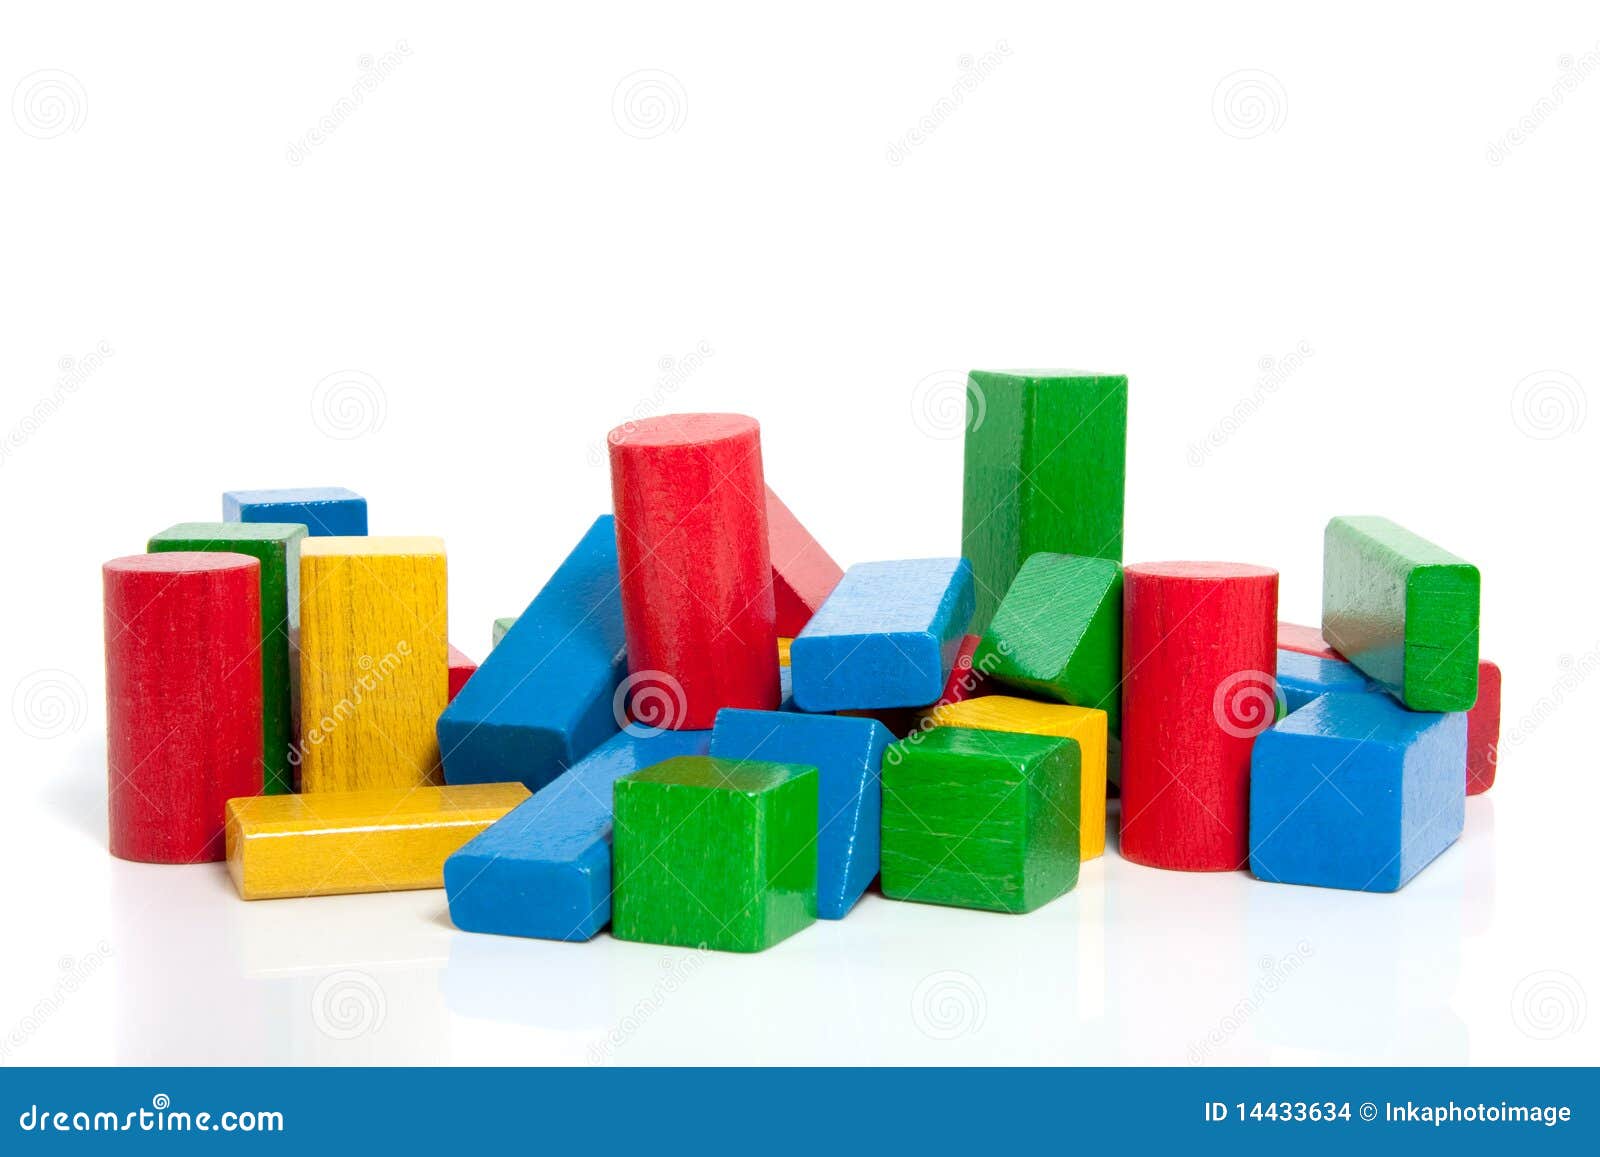 Colorful Wooden Play Blocks Stock Photo - Image of blocks, round: 14433634